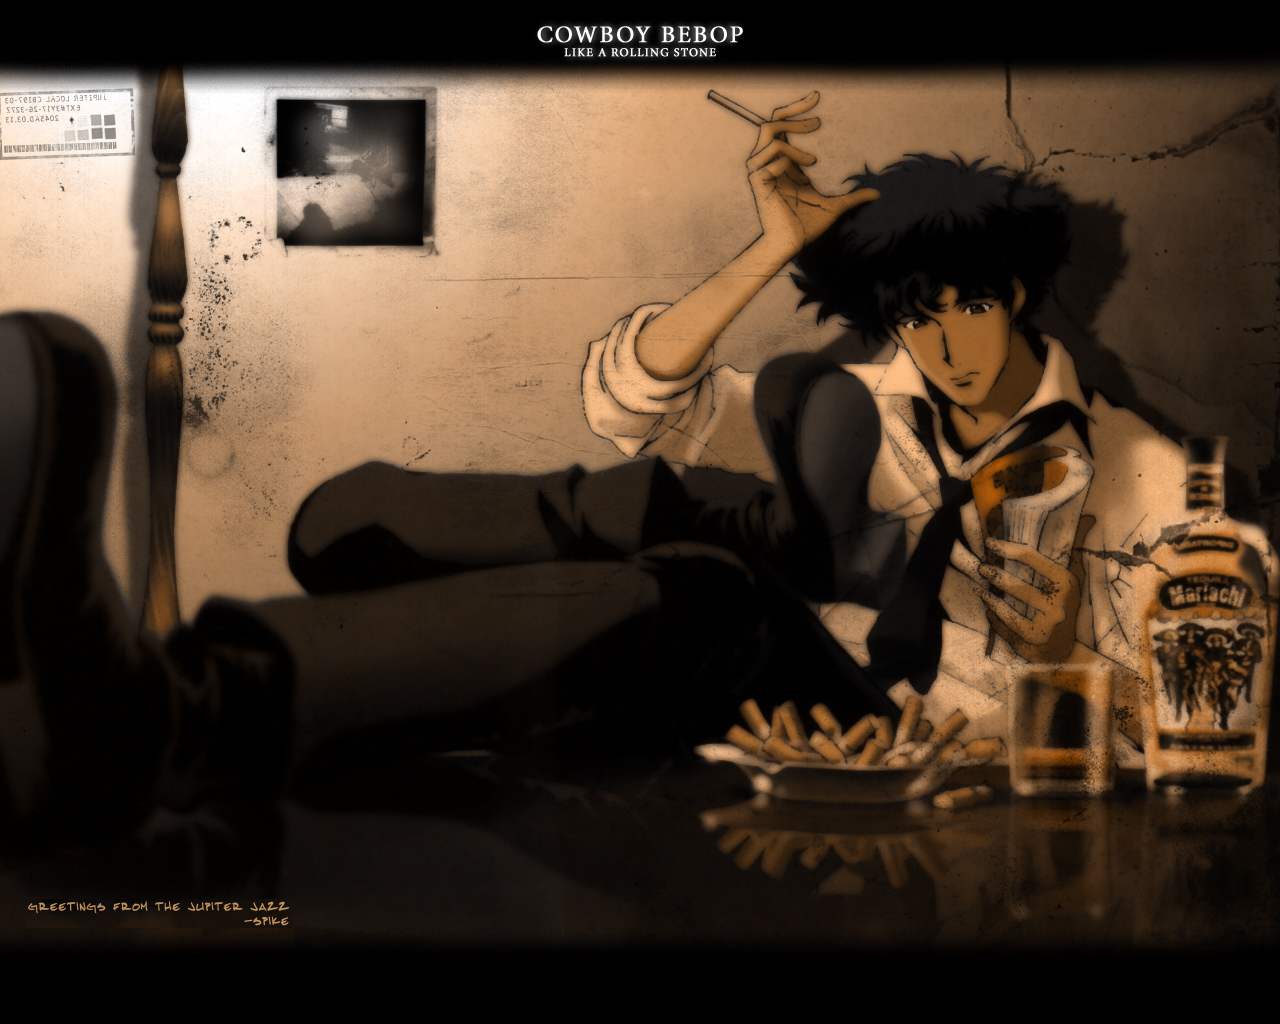 The Cowboy Bebop Anime Wallpaper Titled Spike Like A Rolling Stone